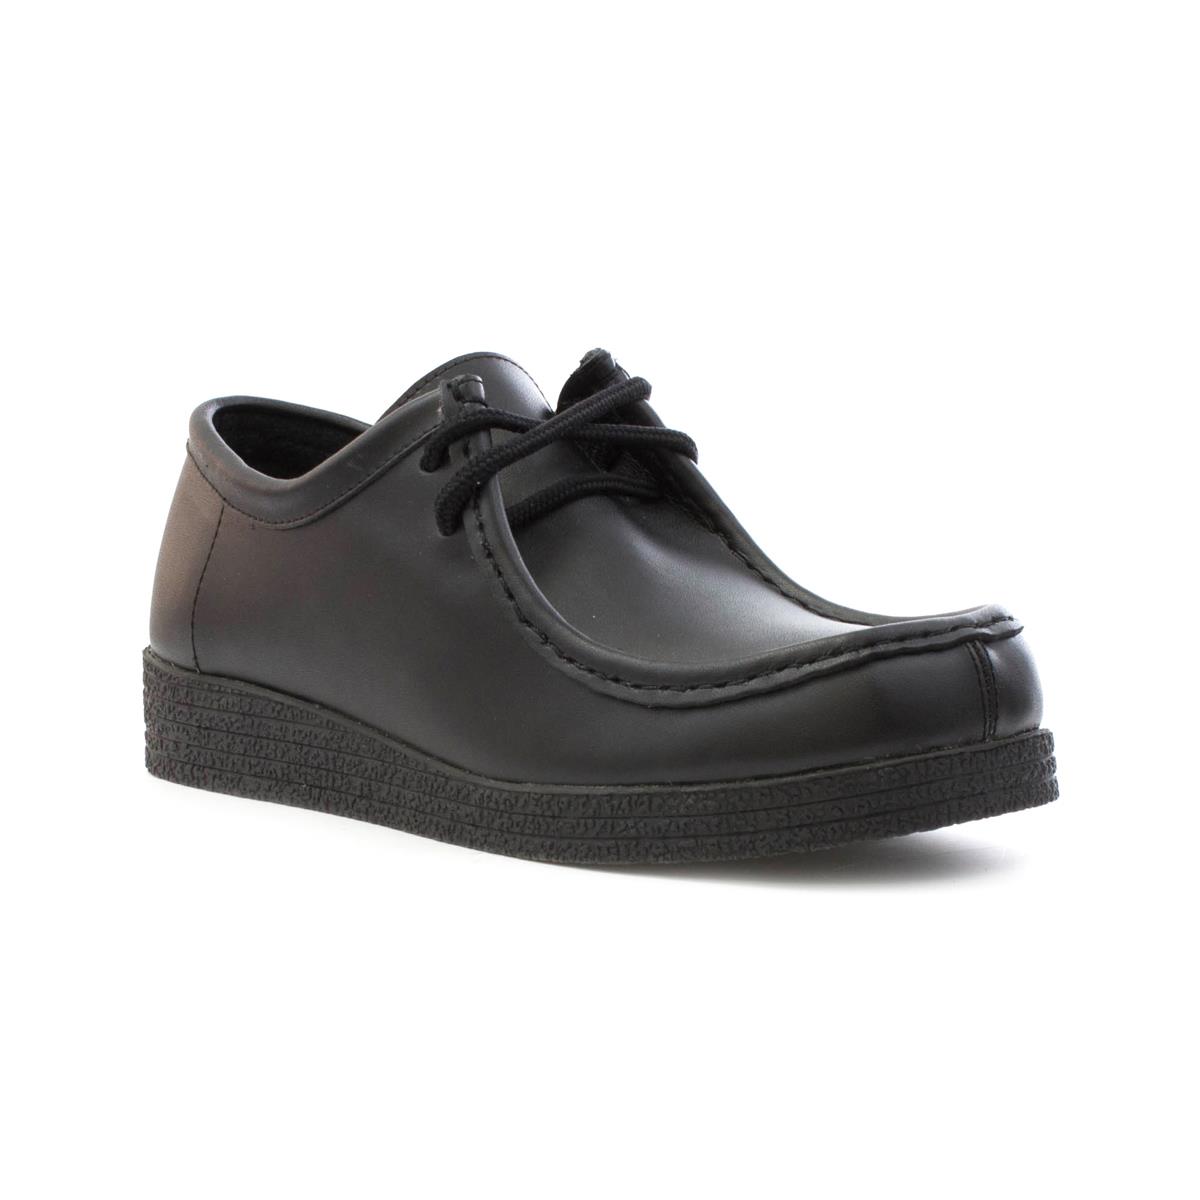 wallabees school shoes off 77% - online 